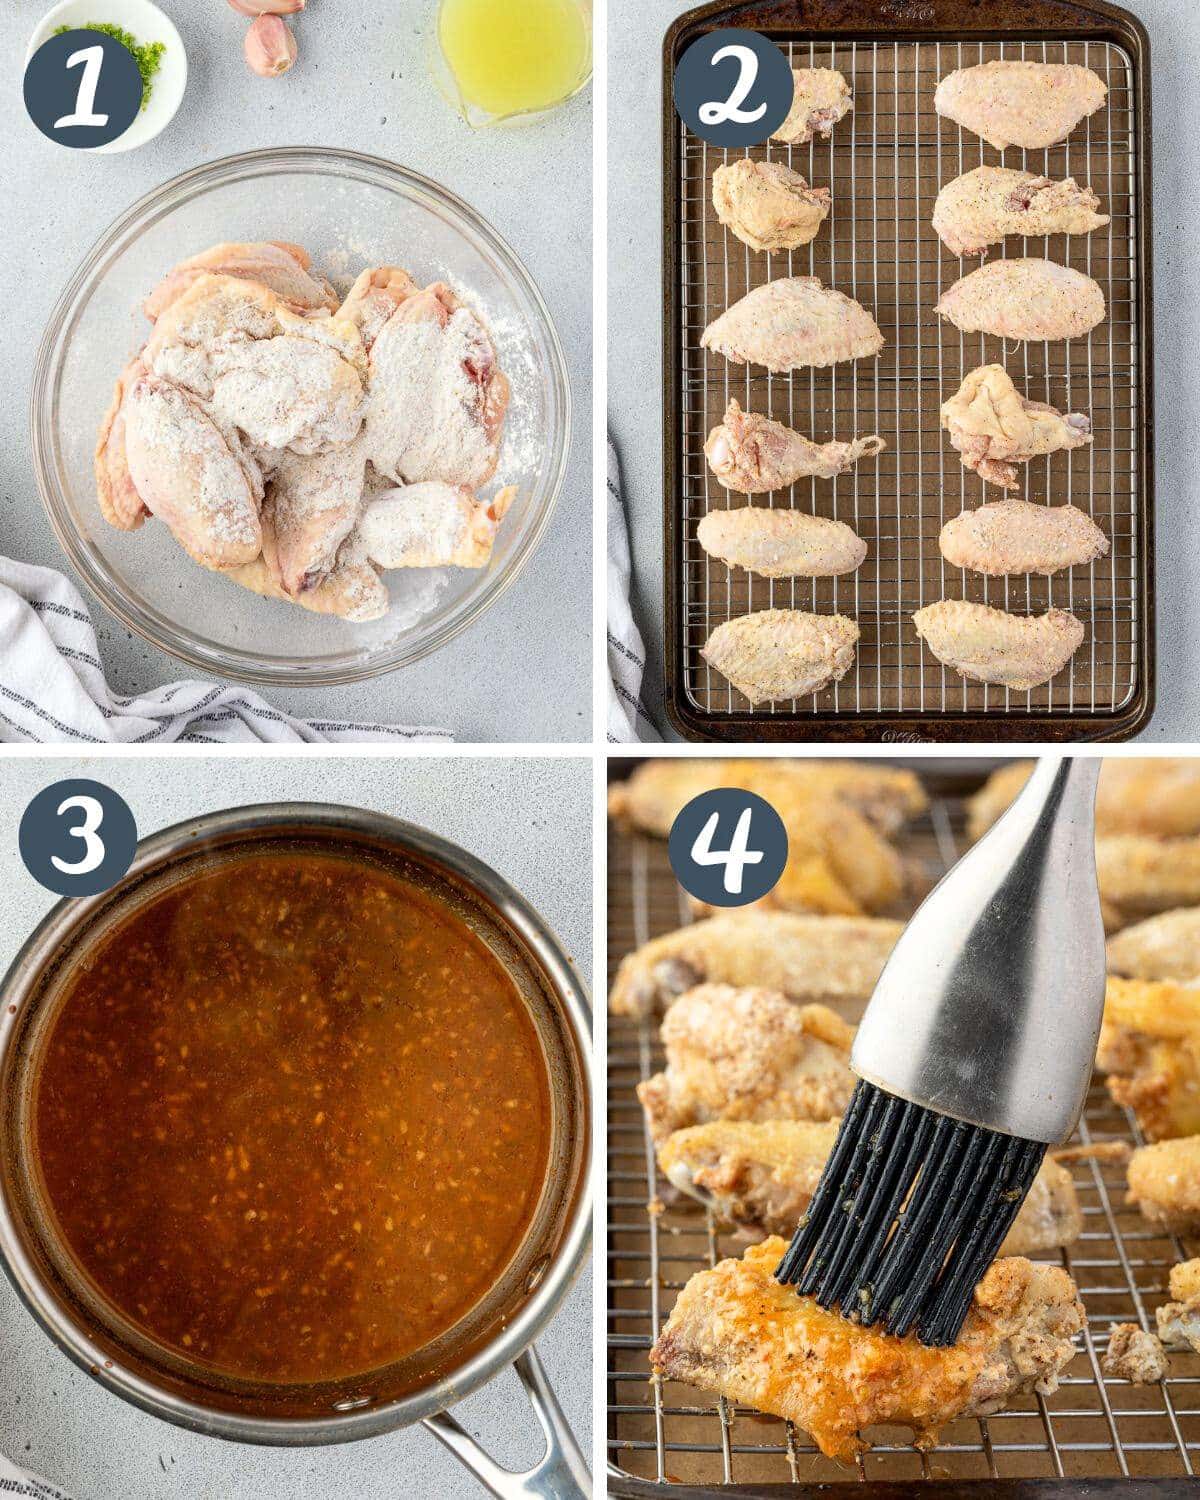 4 images showing the steps to make the recipe, including chicken in a bowl, on a baking sheet, sauce in a pan, and brushing onto the wings.